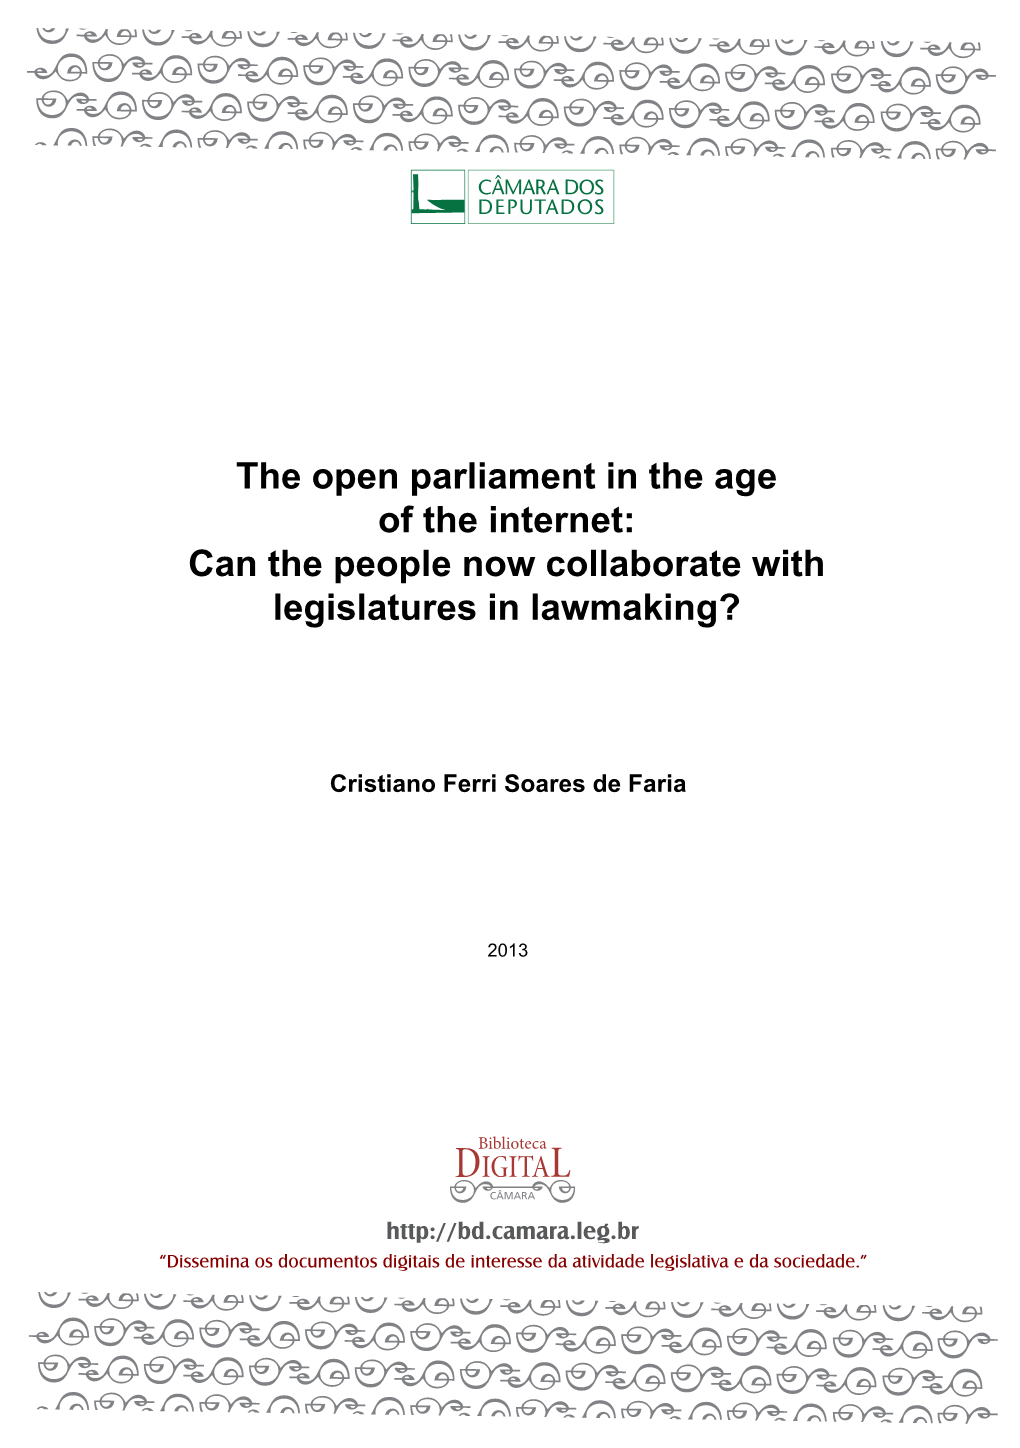 The Open Parliament in the Age of the Internet